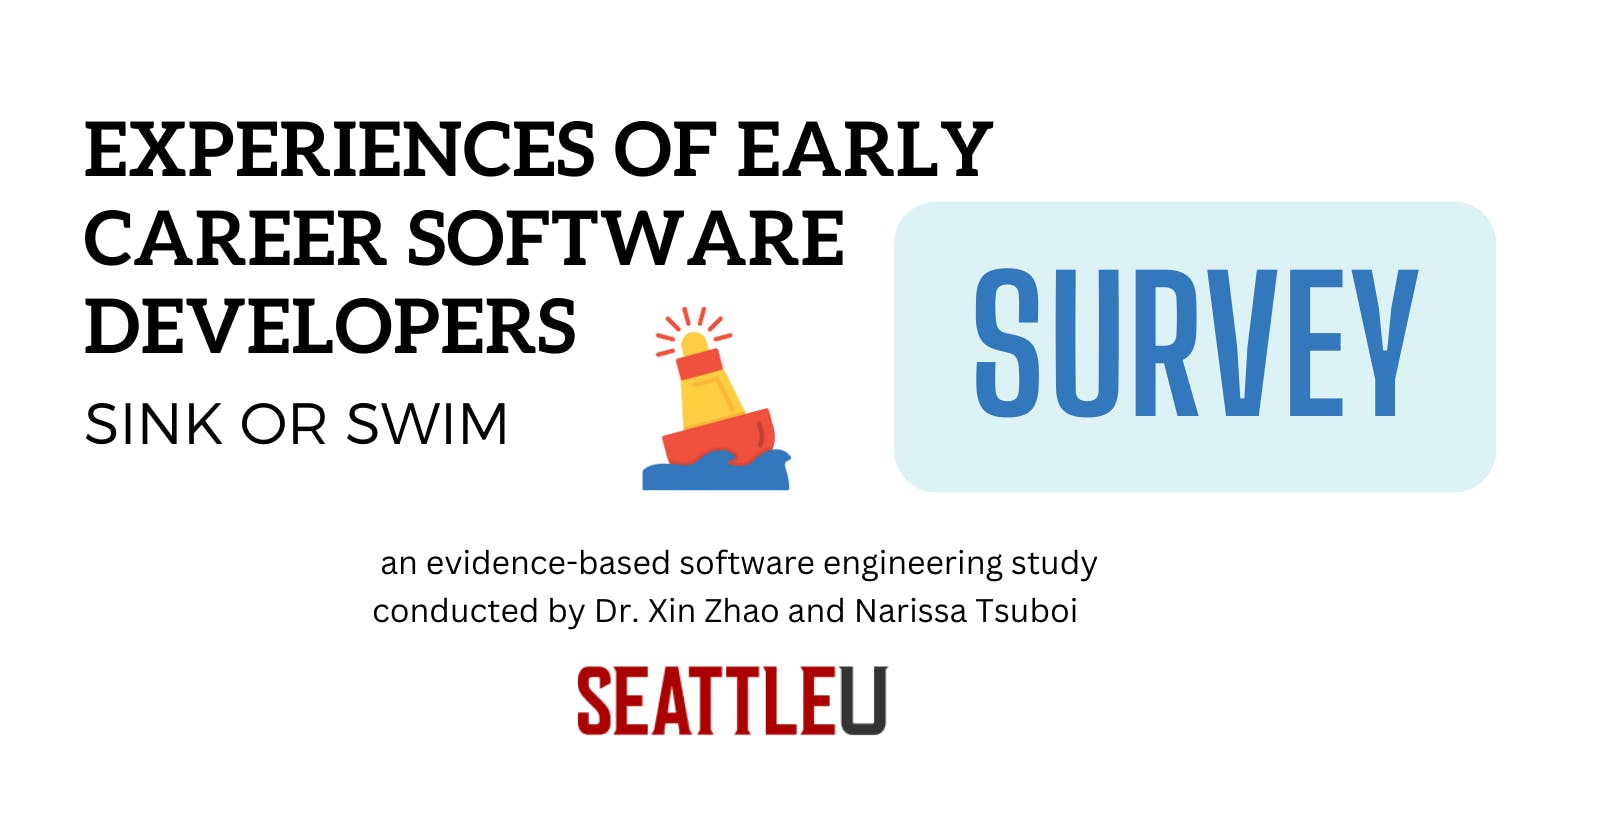 Experiences of Early Career Software Developers